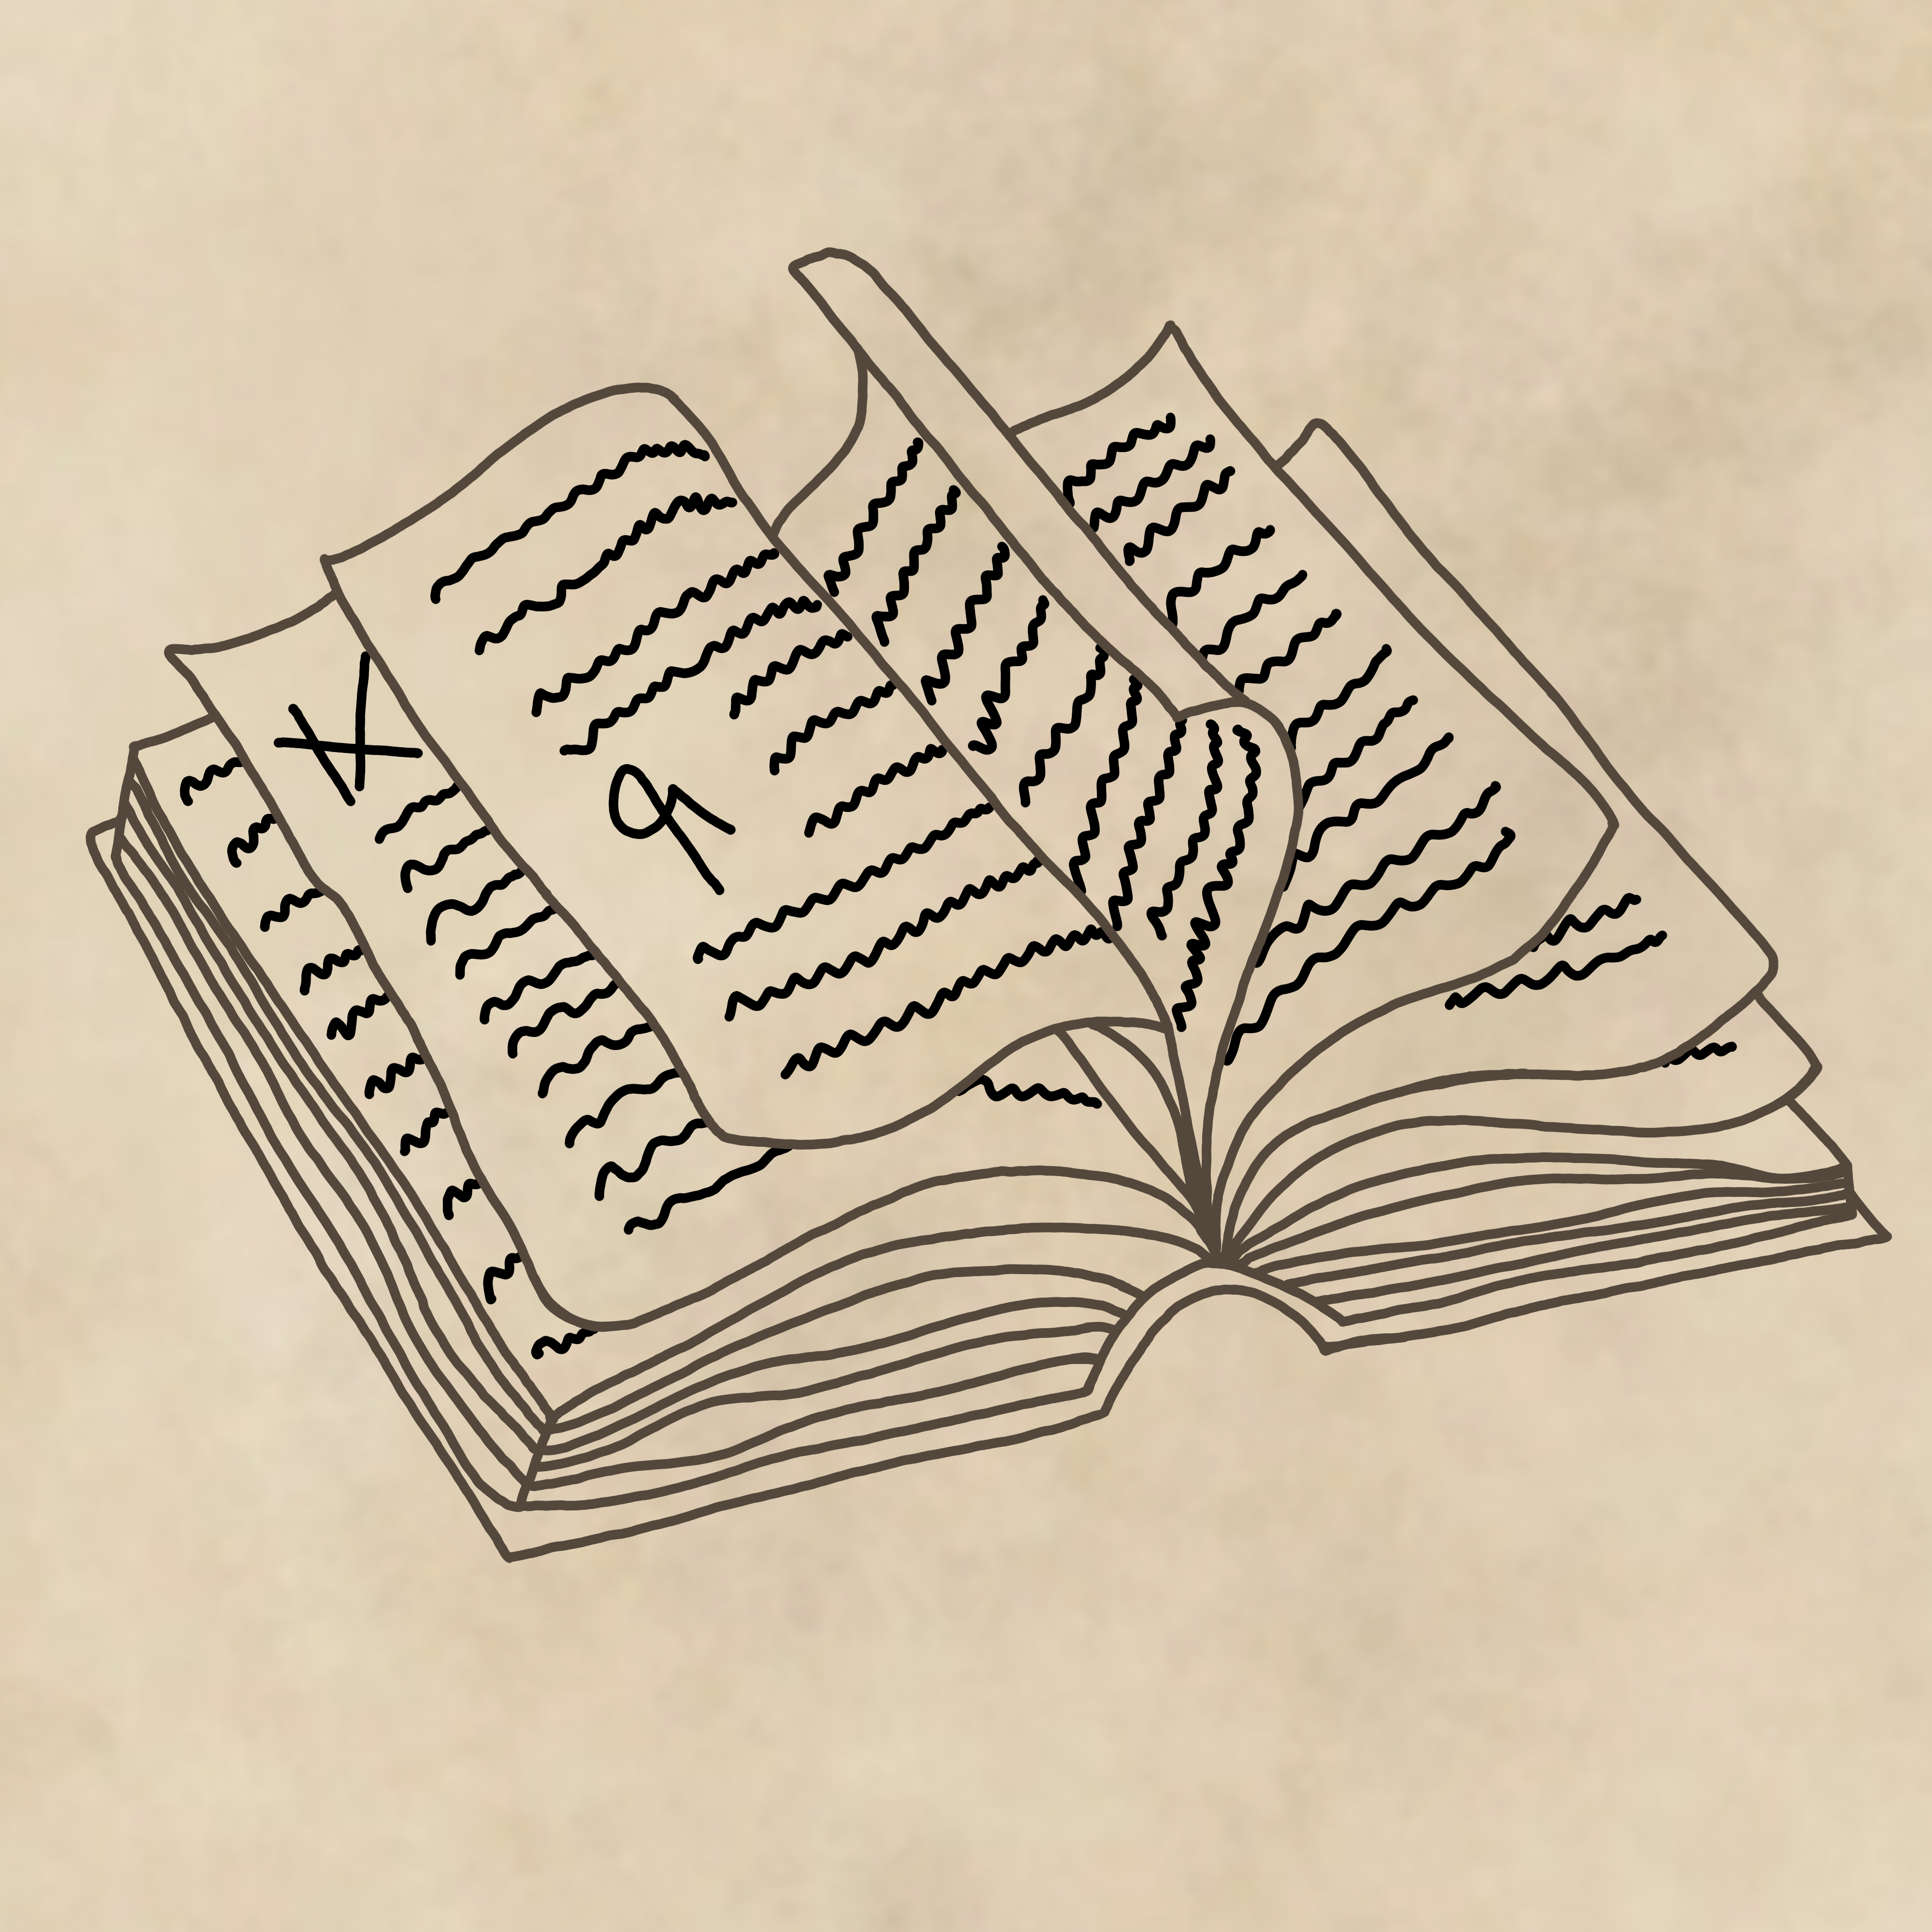 A drawing of an open Tome with writing and drop caps on the pages